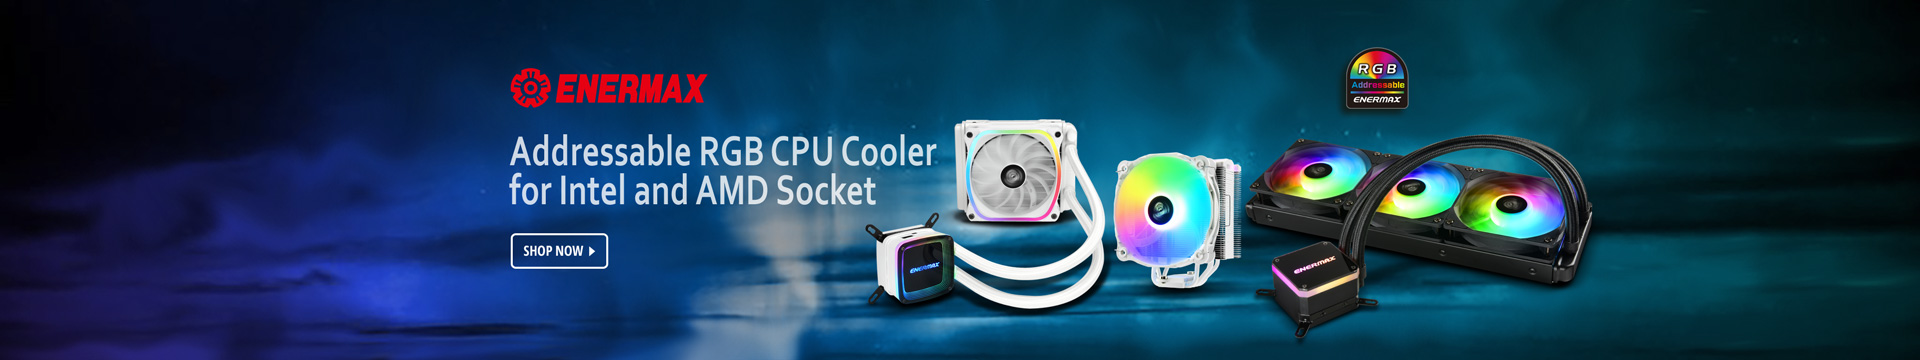 Addressable RGB CPU Cooler for intel and AMD socket